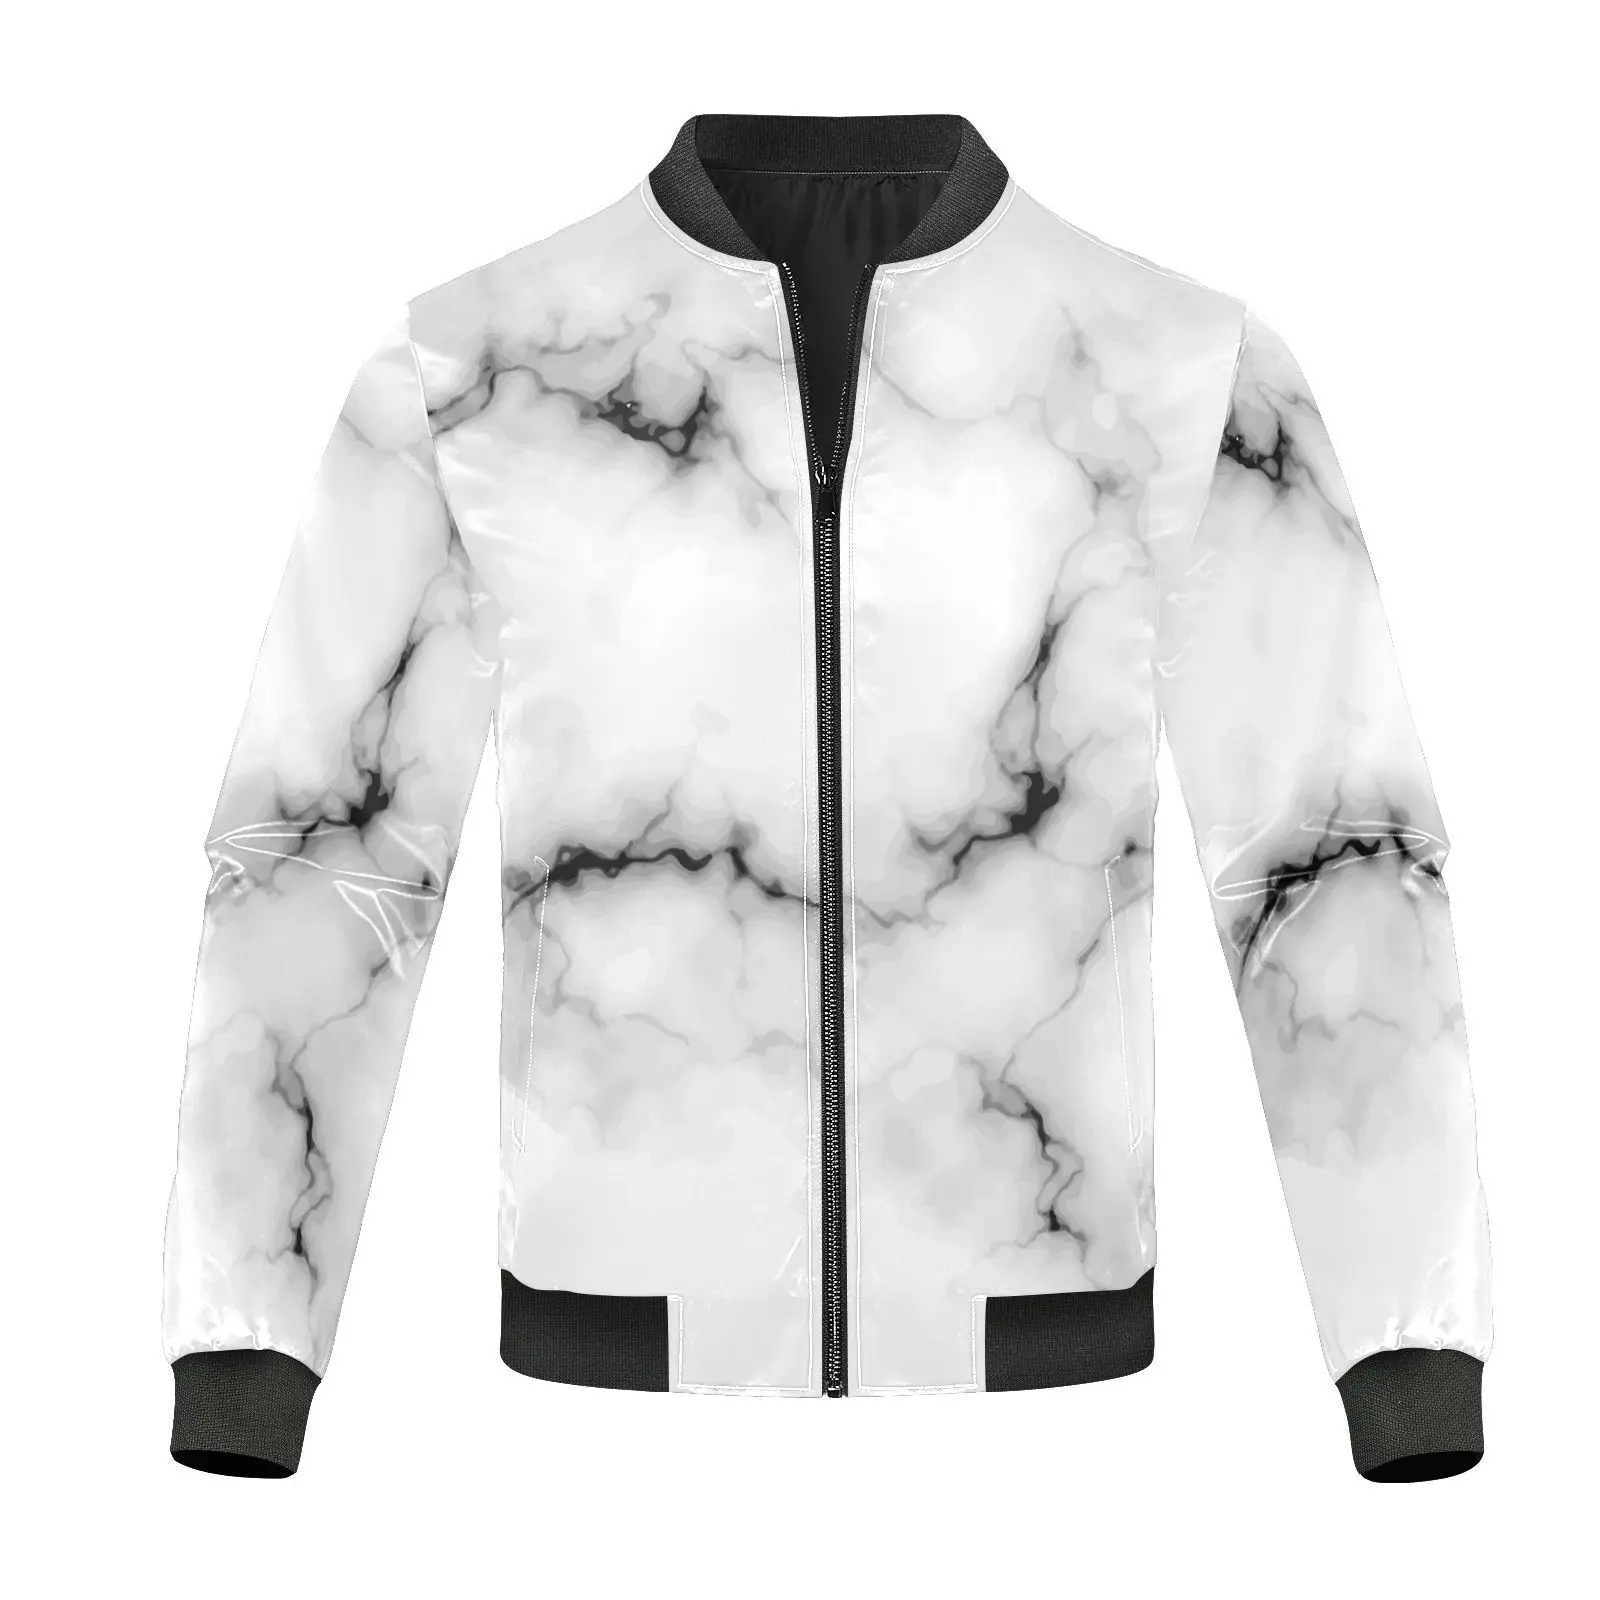 2023 New Men Jacket Casual Mens Jackets Spring and autumn Sportswear Marble printing Jacket Mens jackets Male Coat Plus SIZE